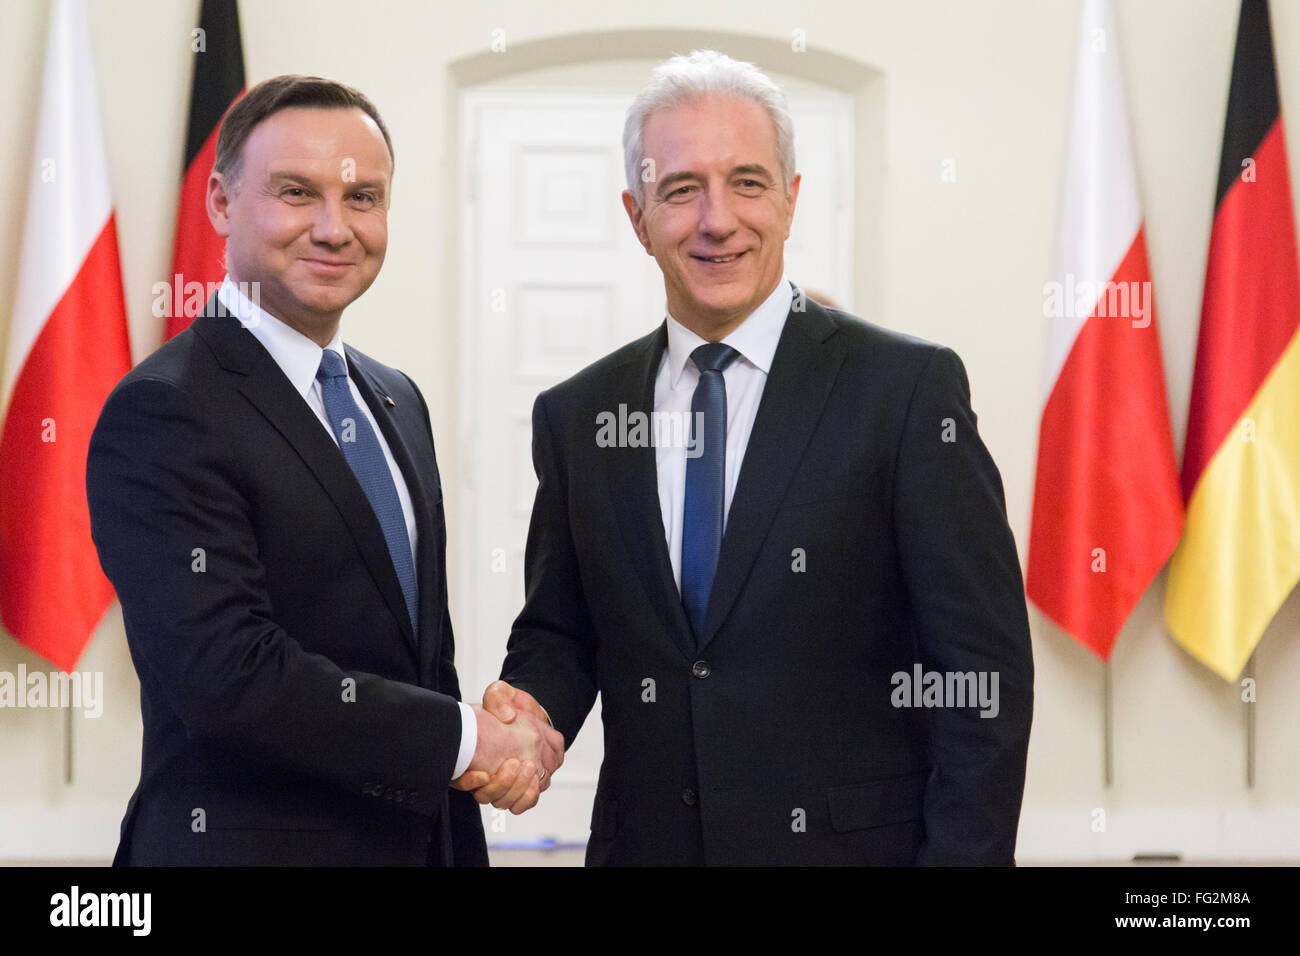 Polish President Andrzej Duda (L) welcomes President of the German Bundesrat Stanislaw Tillich (R) in Presidential Palace on 17 February 2016 in Warsaw, Poland. Stock Photo